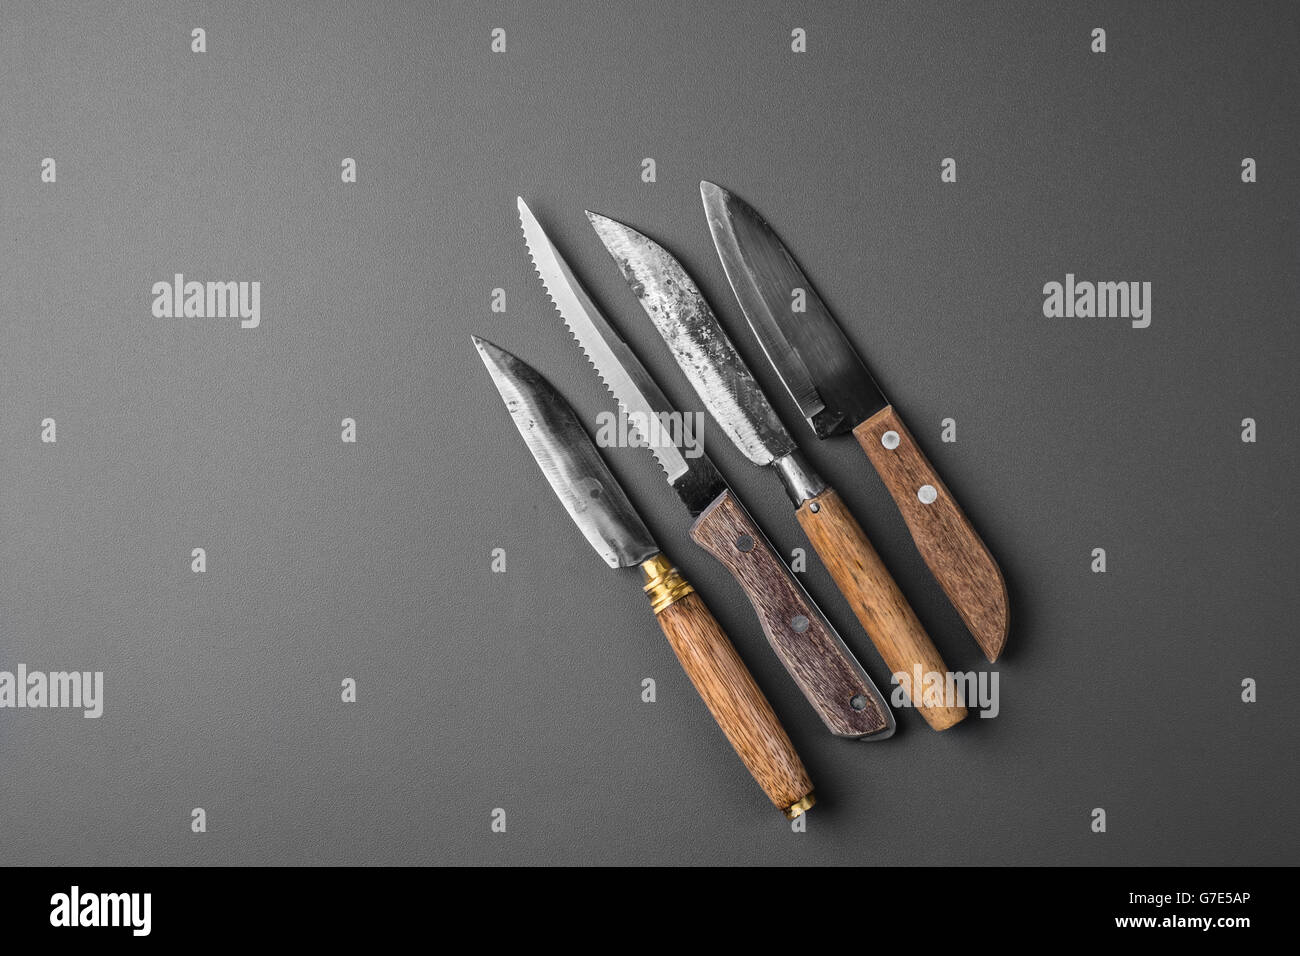 collection of various kitchen knives on a grey background Stock Photo